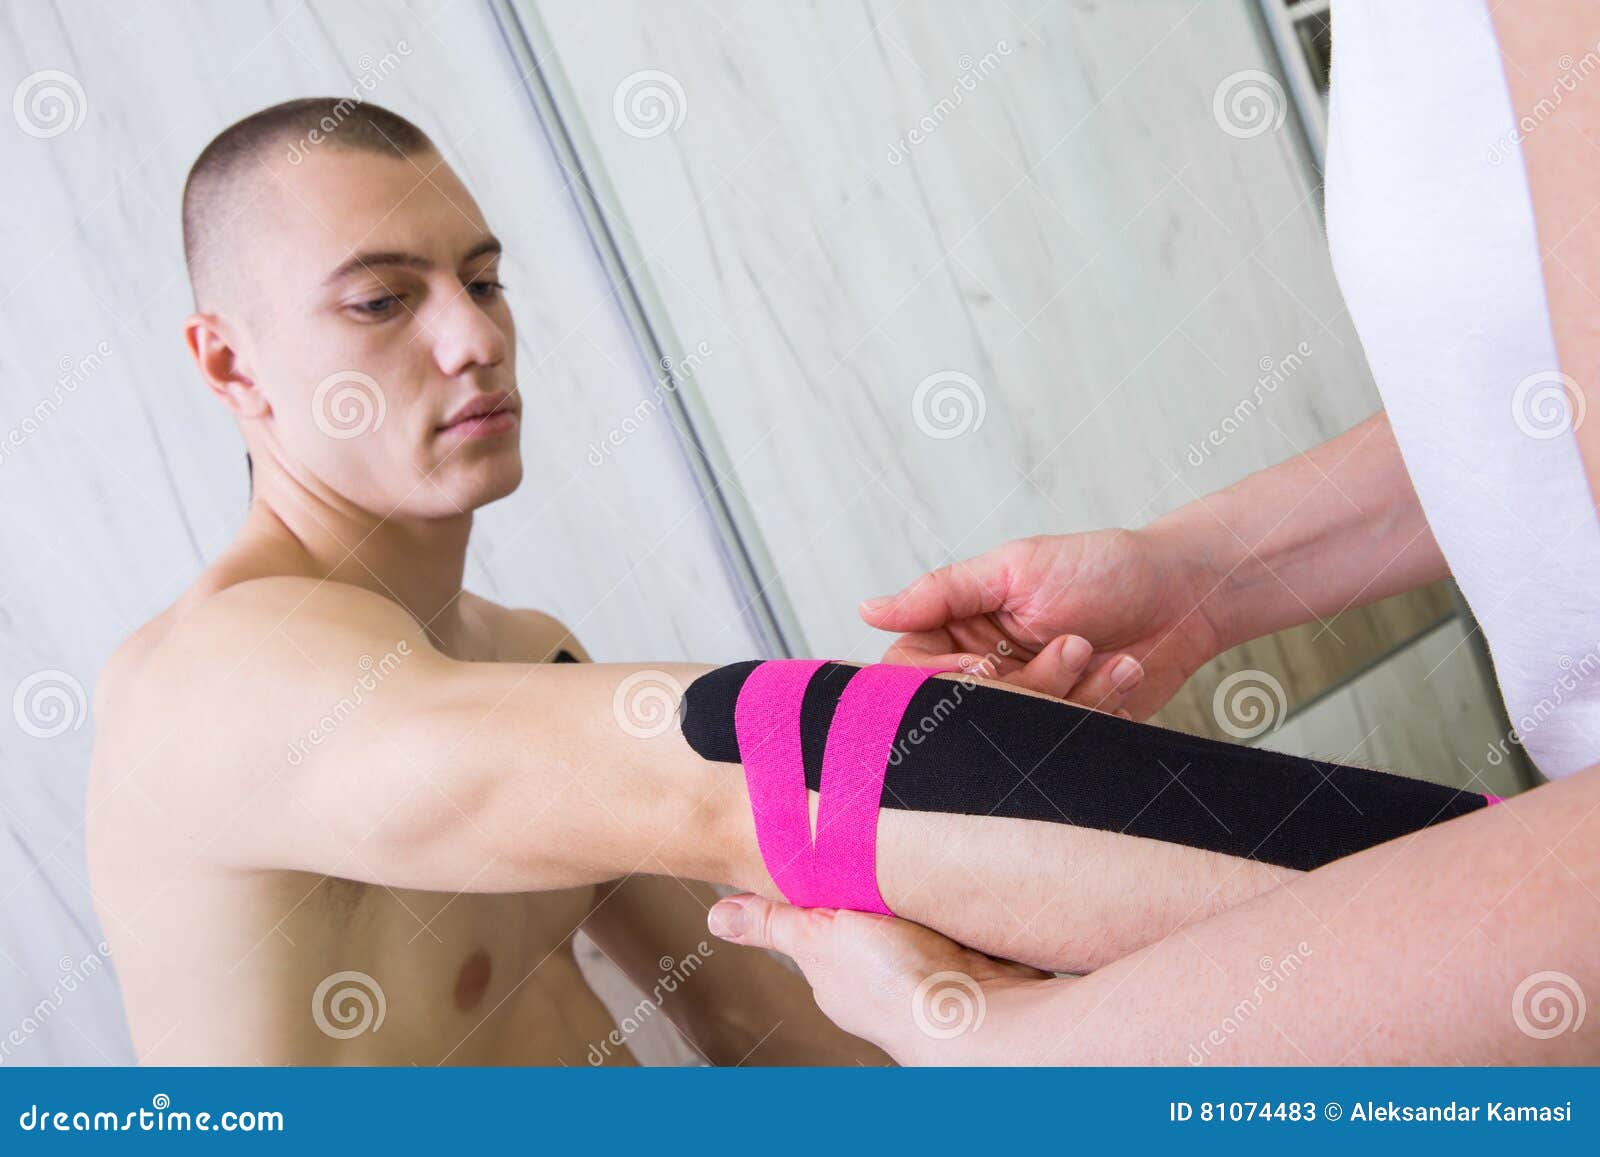 Female physiotherapist putting kinesio tape on patients hand